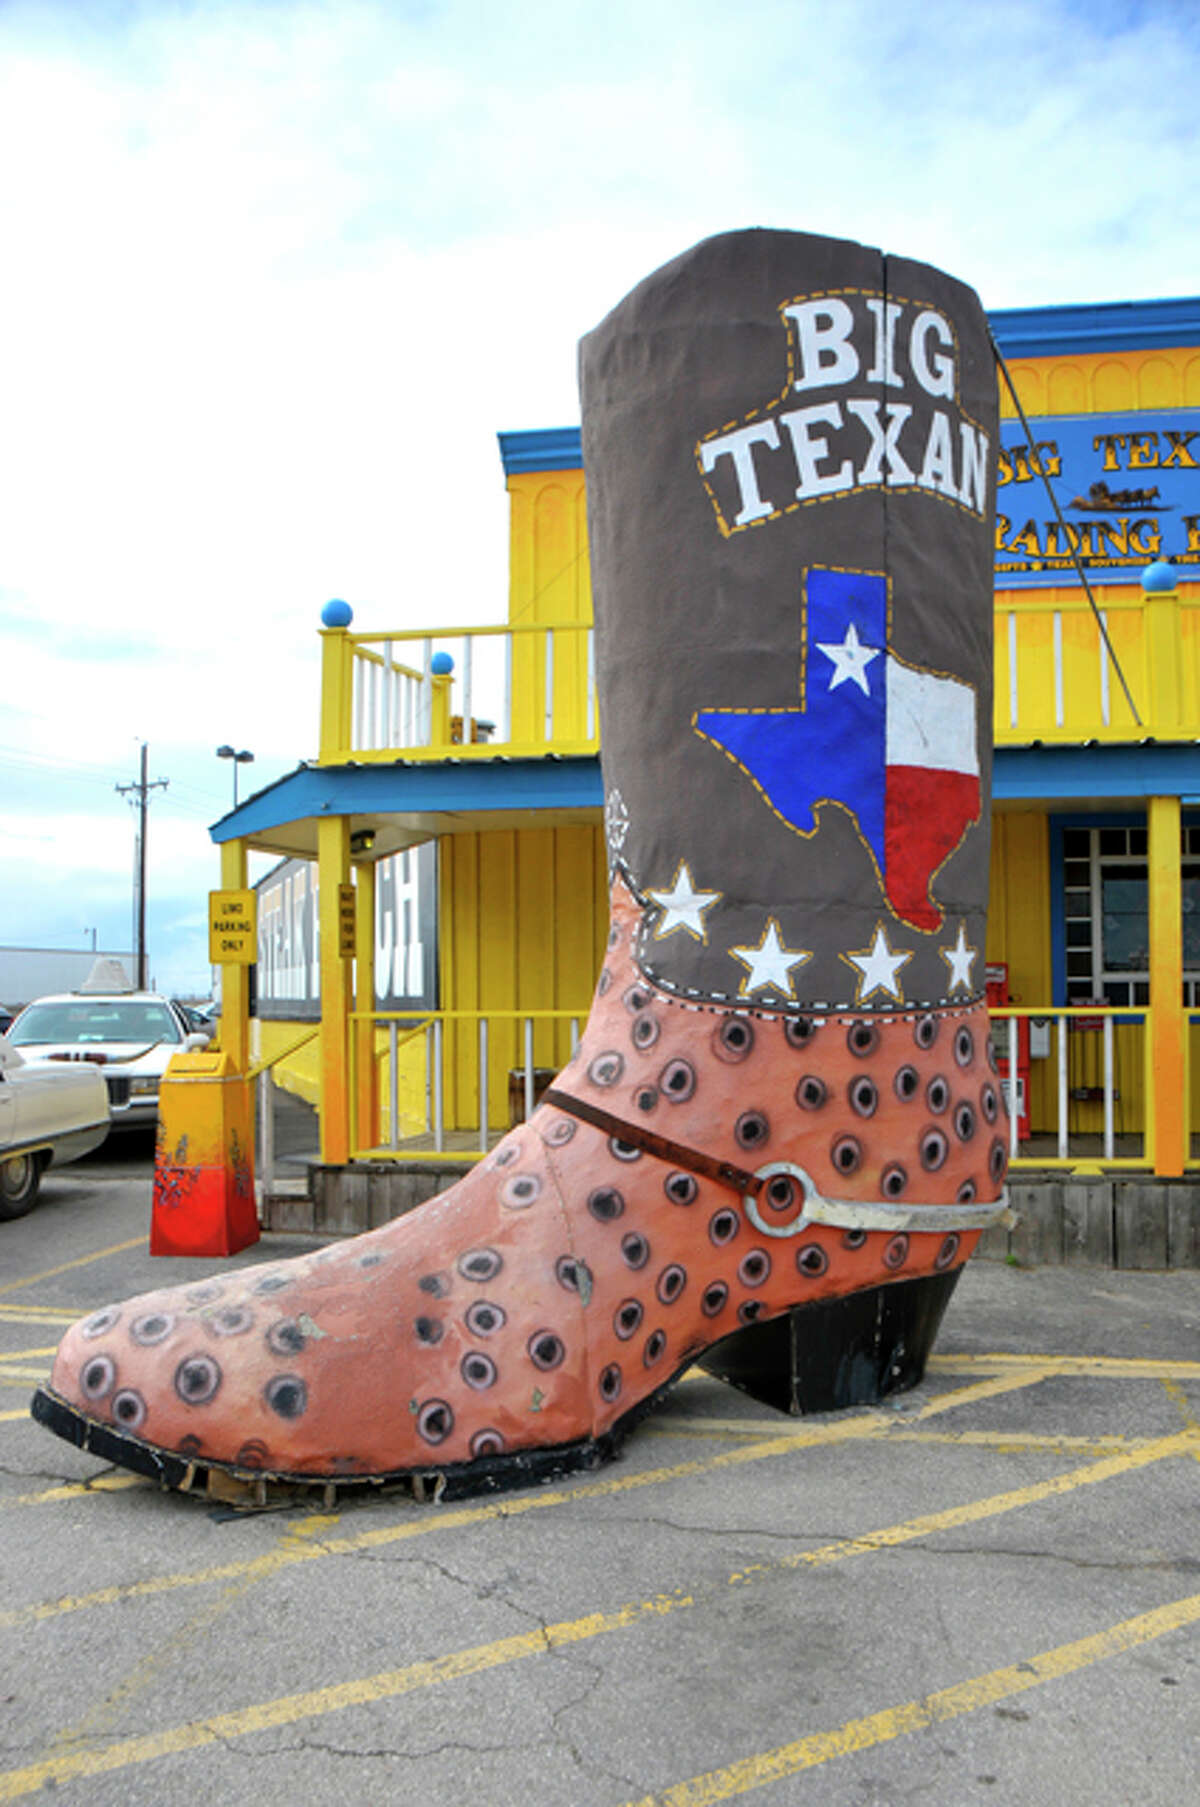 The Big Texan Steak Ranch Amarillo, 7701 Interstate 40 Access Road Downing a 72-ounce steak, priced at $72, will make you a winner. The reward? The pricey piece of meat will be free to anyone who can finish it in one seating.